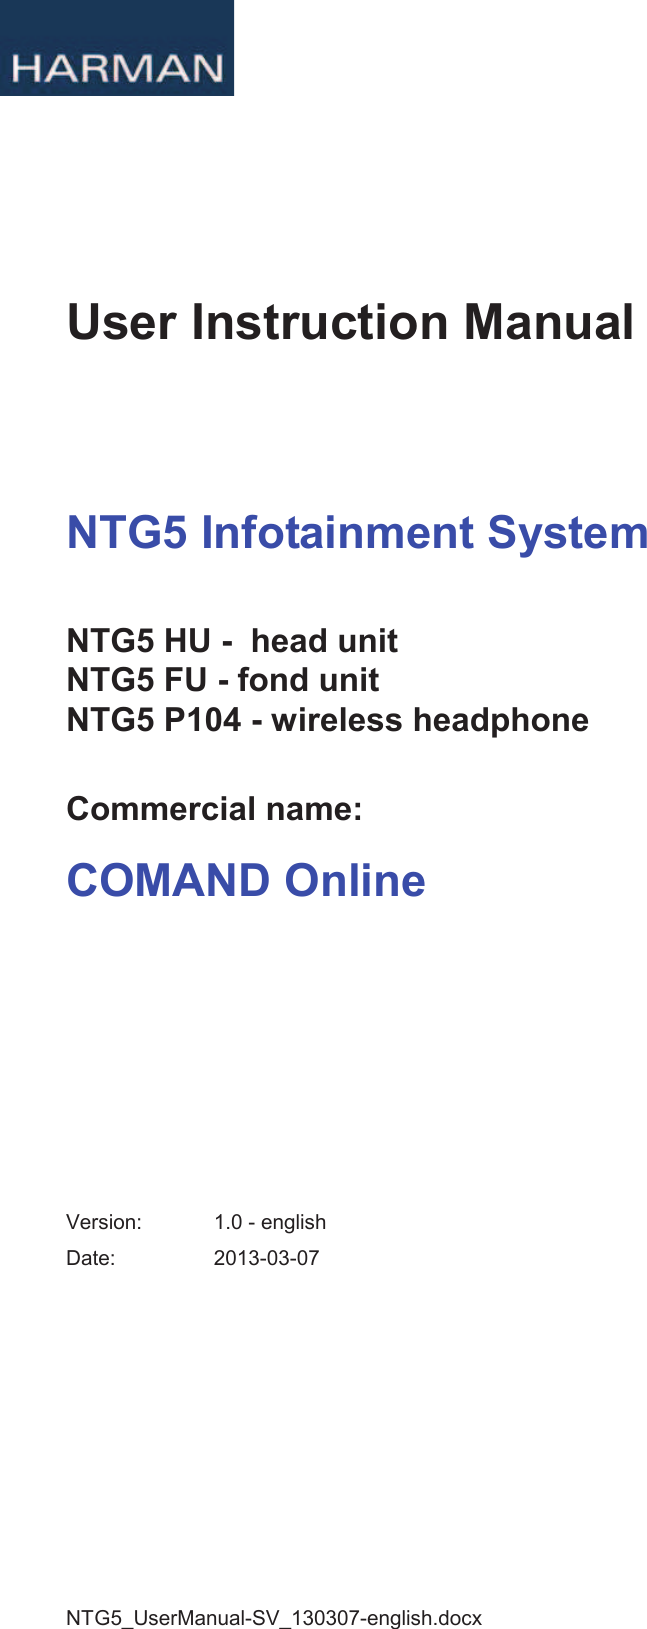 NTG5_UserManual-SV_130307-english.docx User Instruction Manual NTG5 Infotainment System NTG5 HU -  head unit NTG5 FU - fond unit NTG5 P104 - wireless headphoneCommercial name: COMAND Online Version:  1.0 - english Date:  2013-03-07 PDF compression, OCR, web optimization using a watermarked evaluation copy of CVISION PDFCompressor